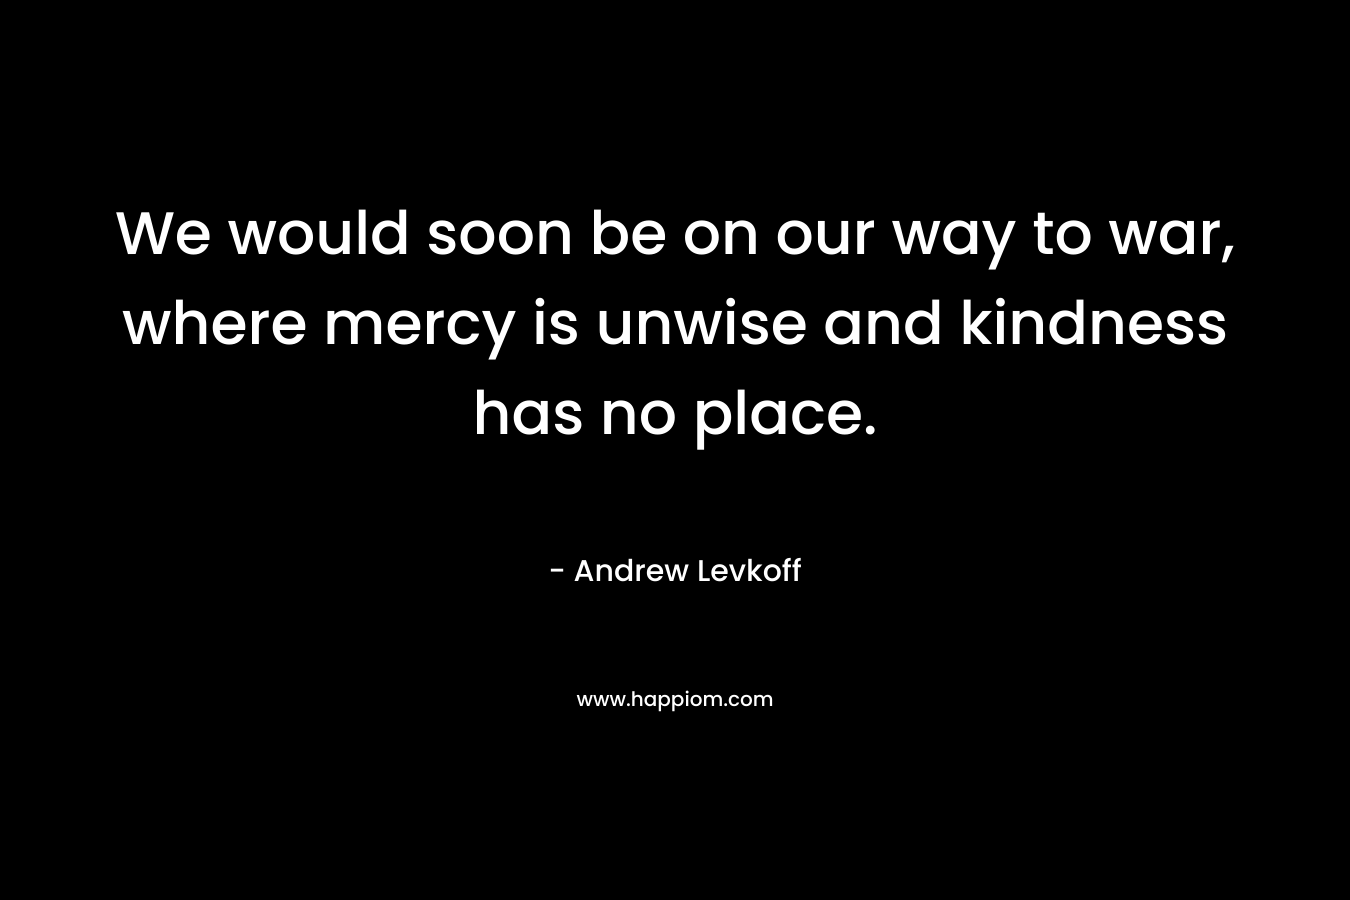 We would soon be on our way to war, where mercy is unwise and kindness has no place.